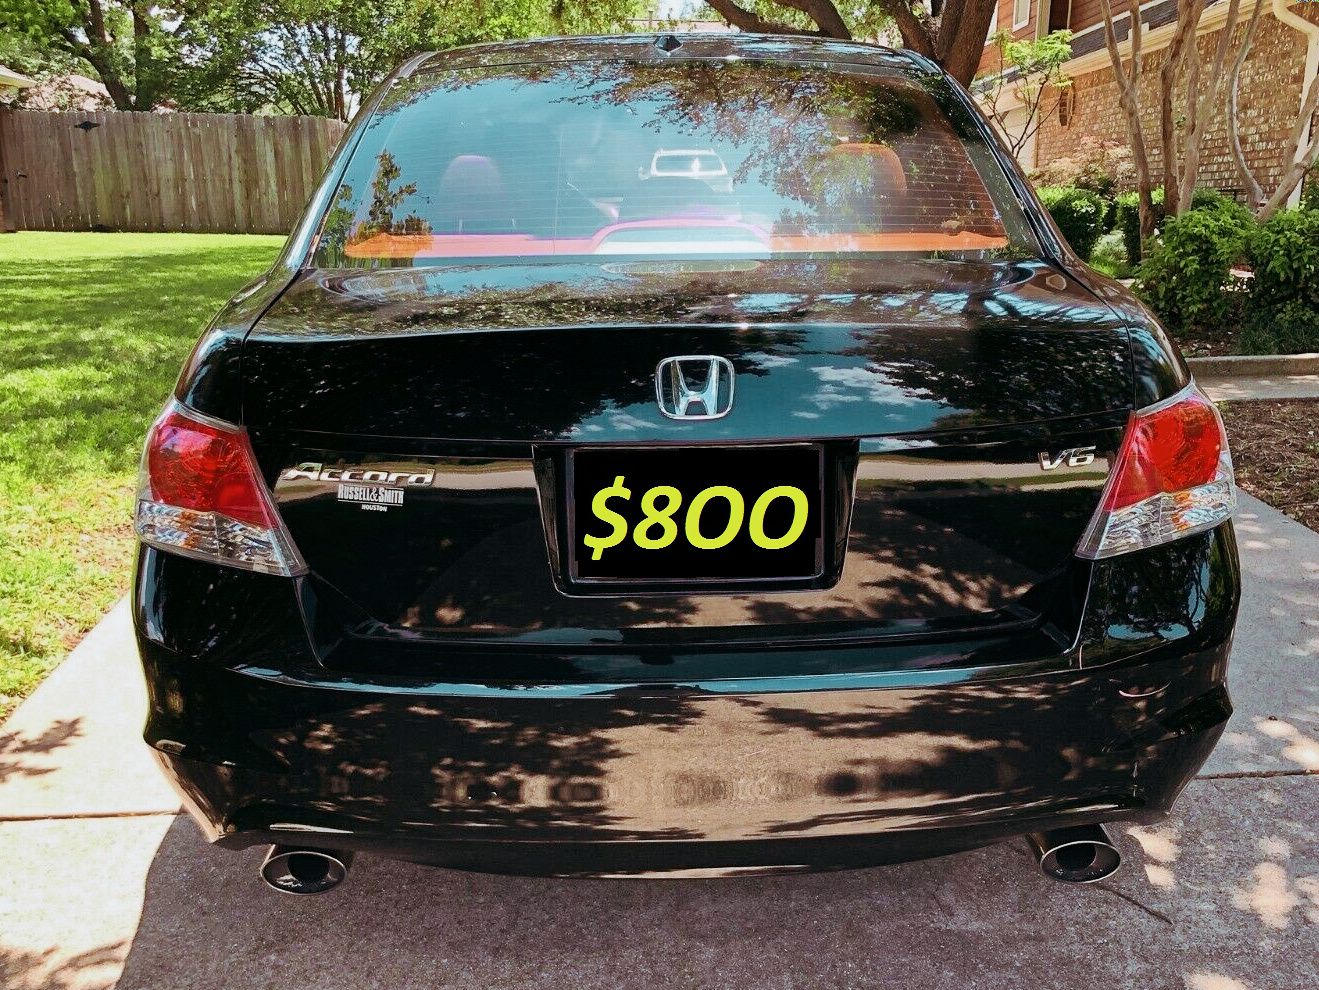 🔥🔥$8OO Up for sale 2OO9 Honda Accord Clean title URGENT!🔥🔥